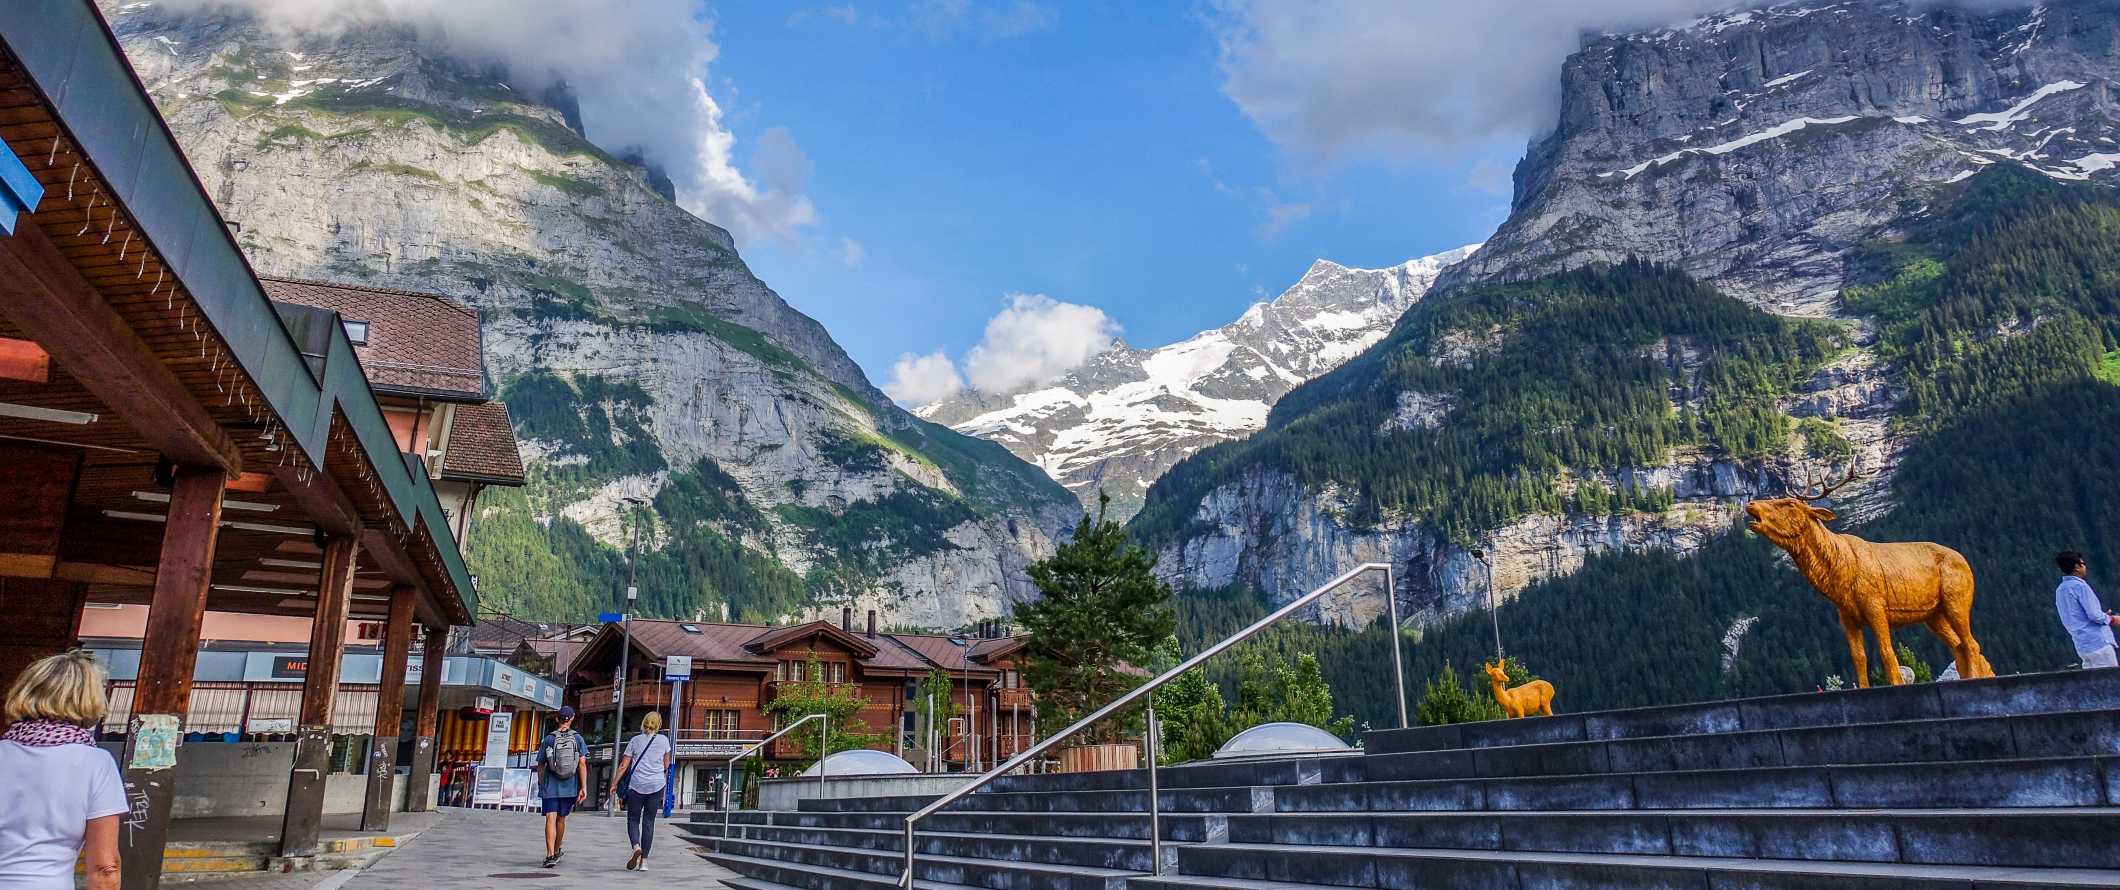 People walking around a street amongst wooden chalets with dramatic mountains rising up in the background in Interlaken, Switzerland